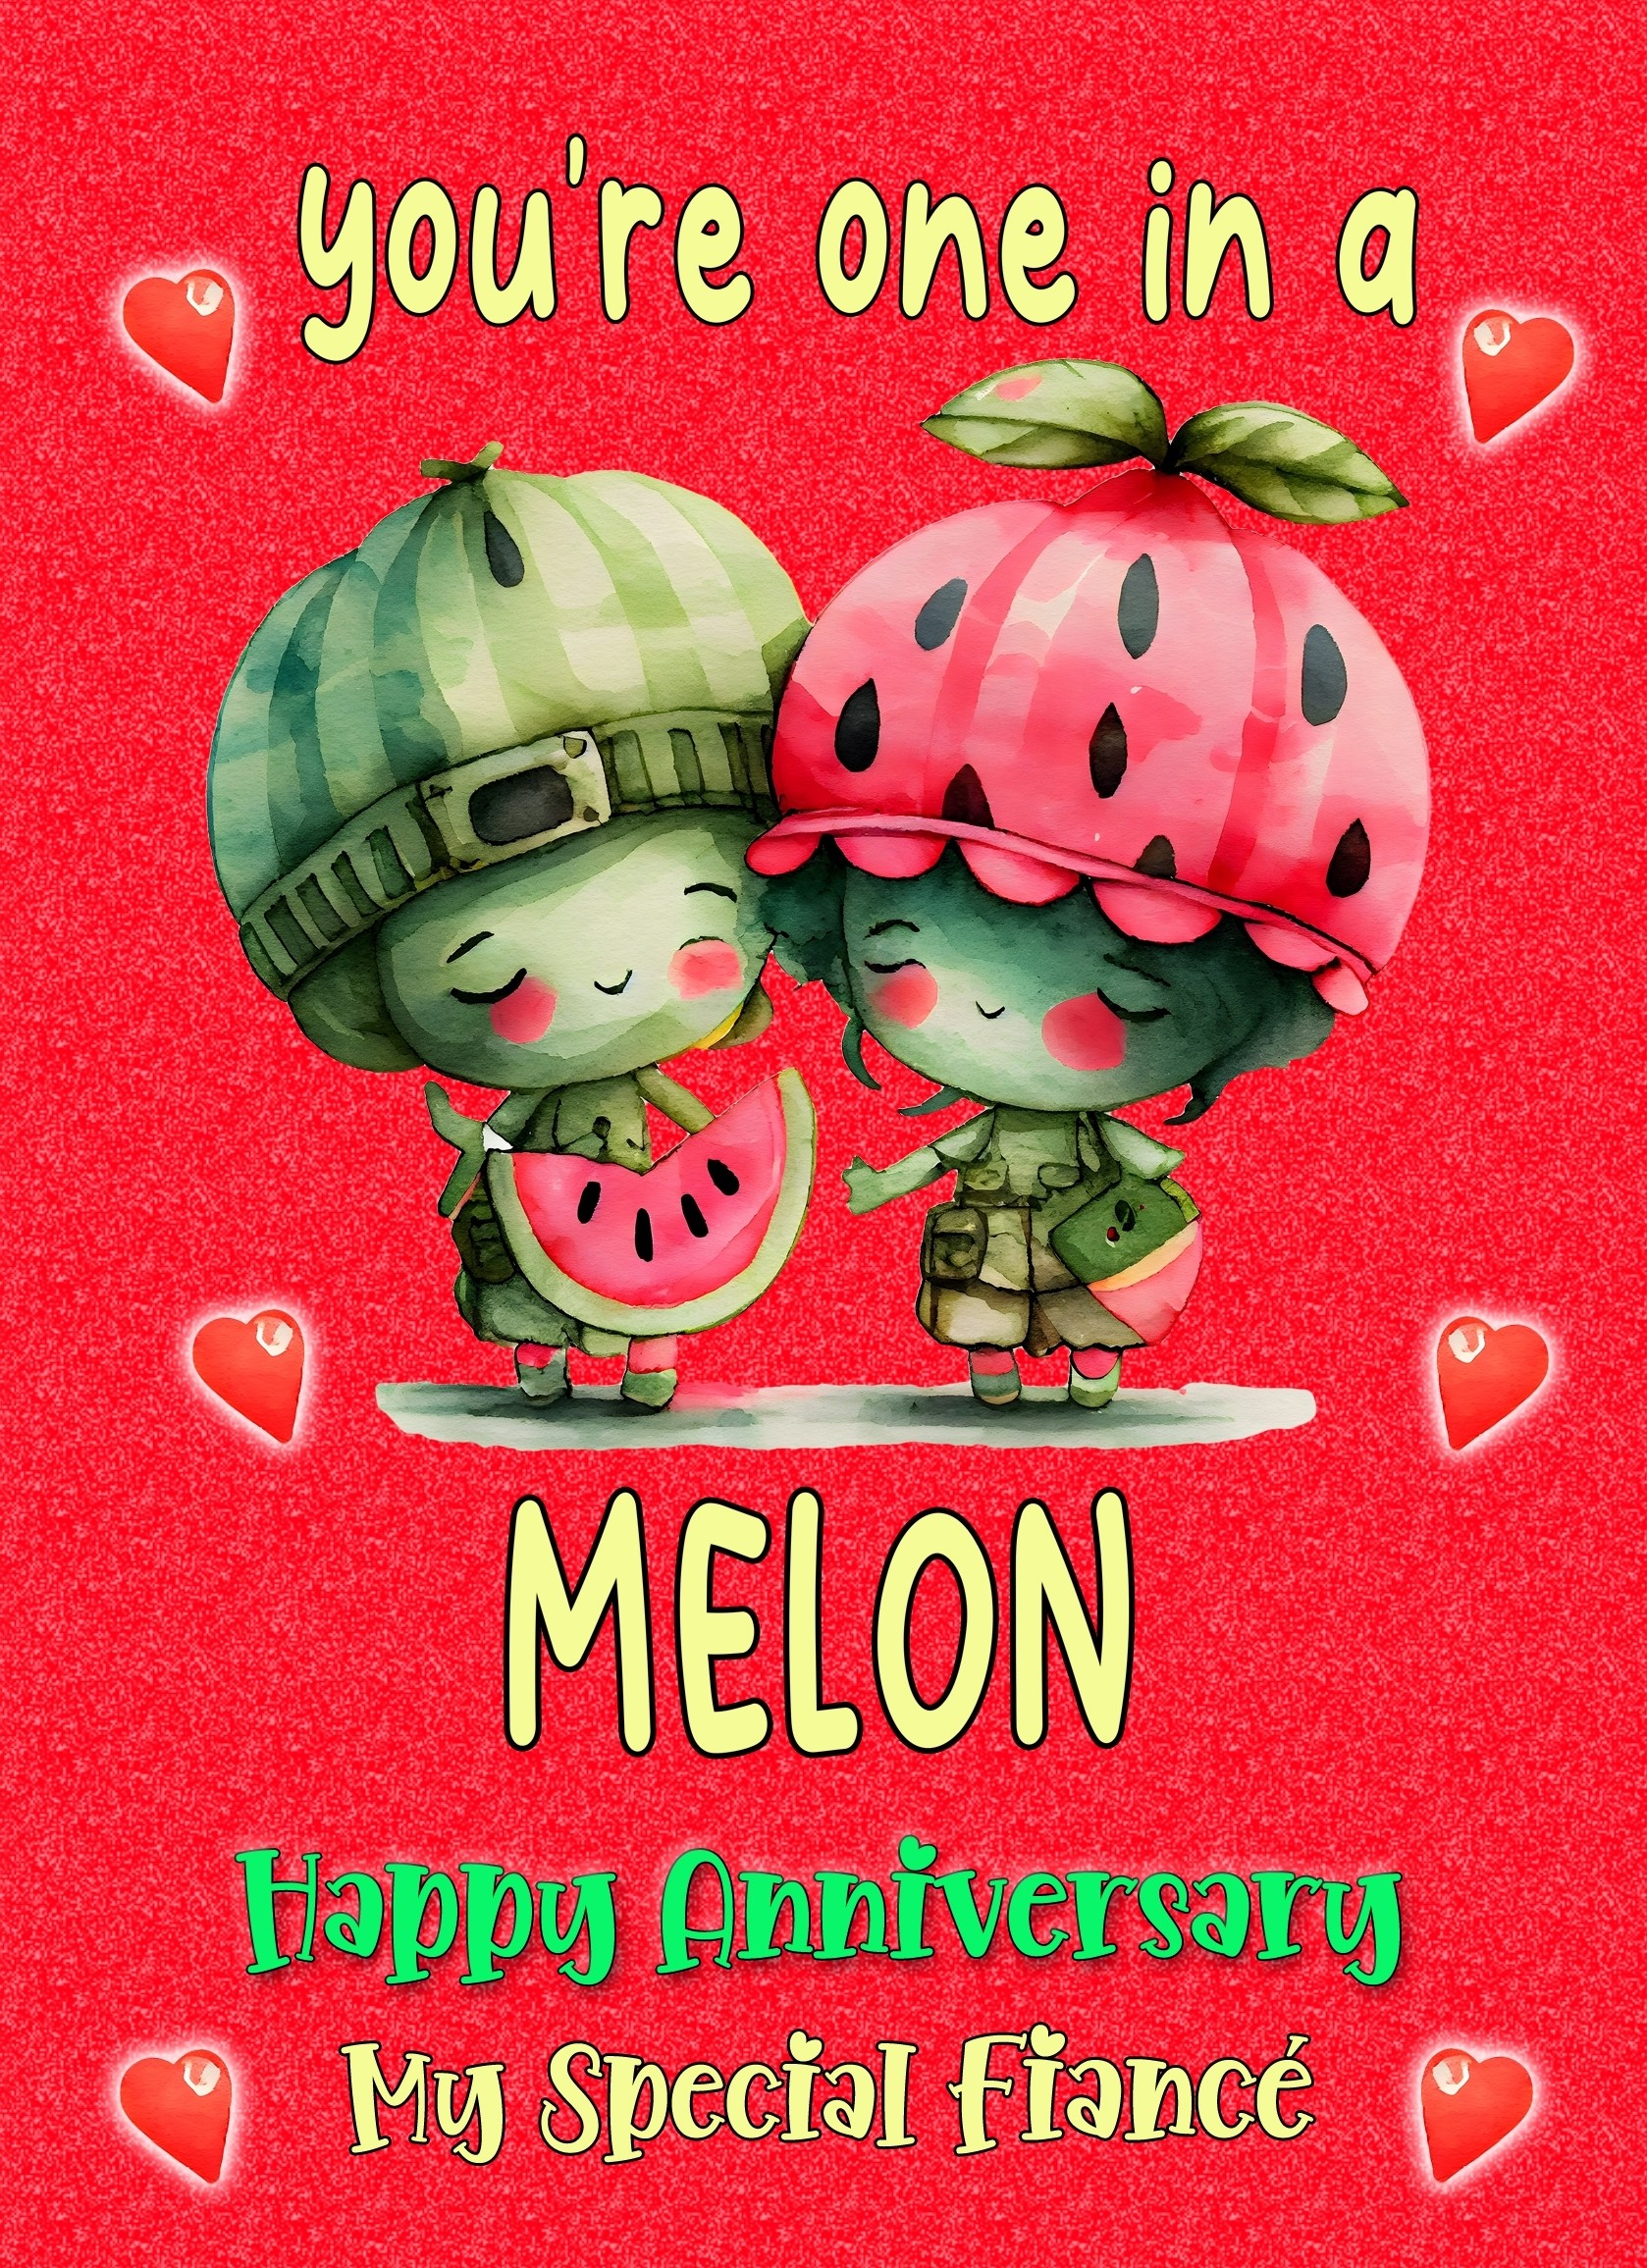 Funny Pun Romantic Anniversary Card for Fiance (One in a Melon)